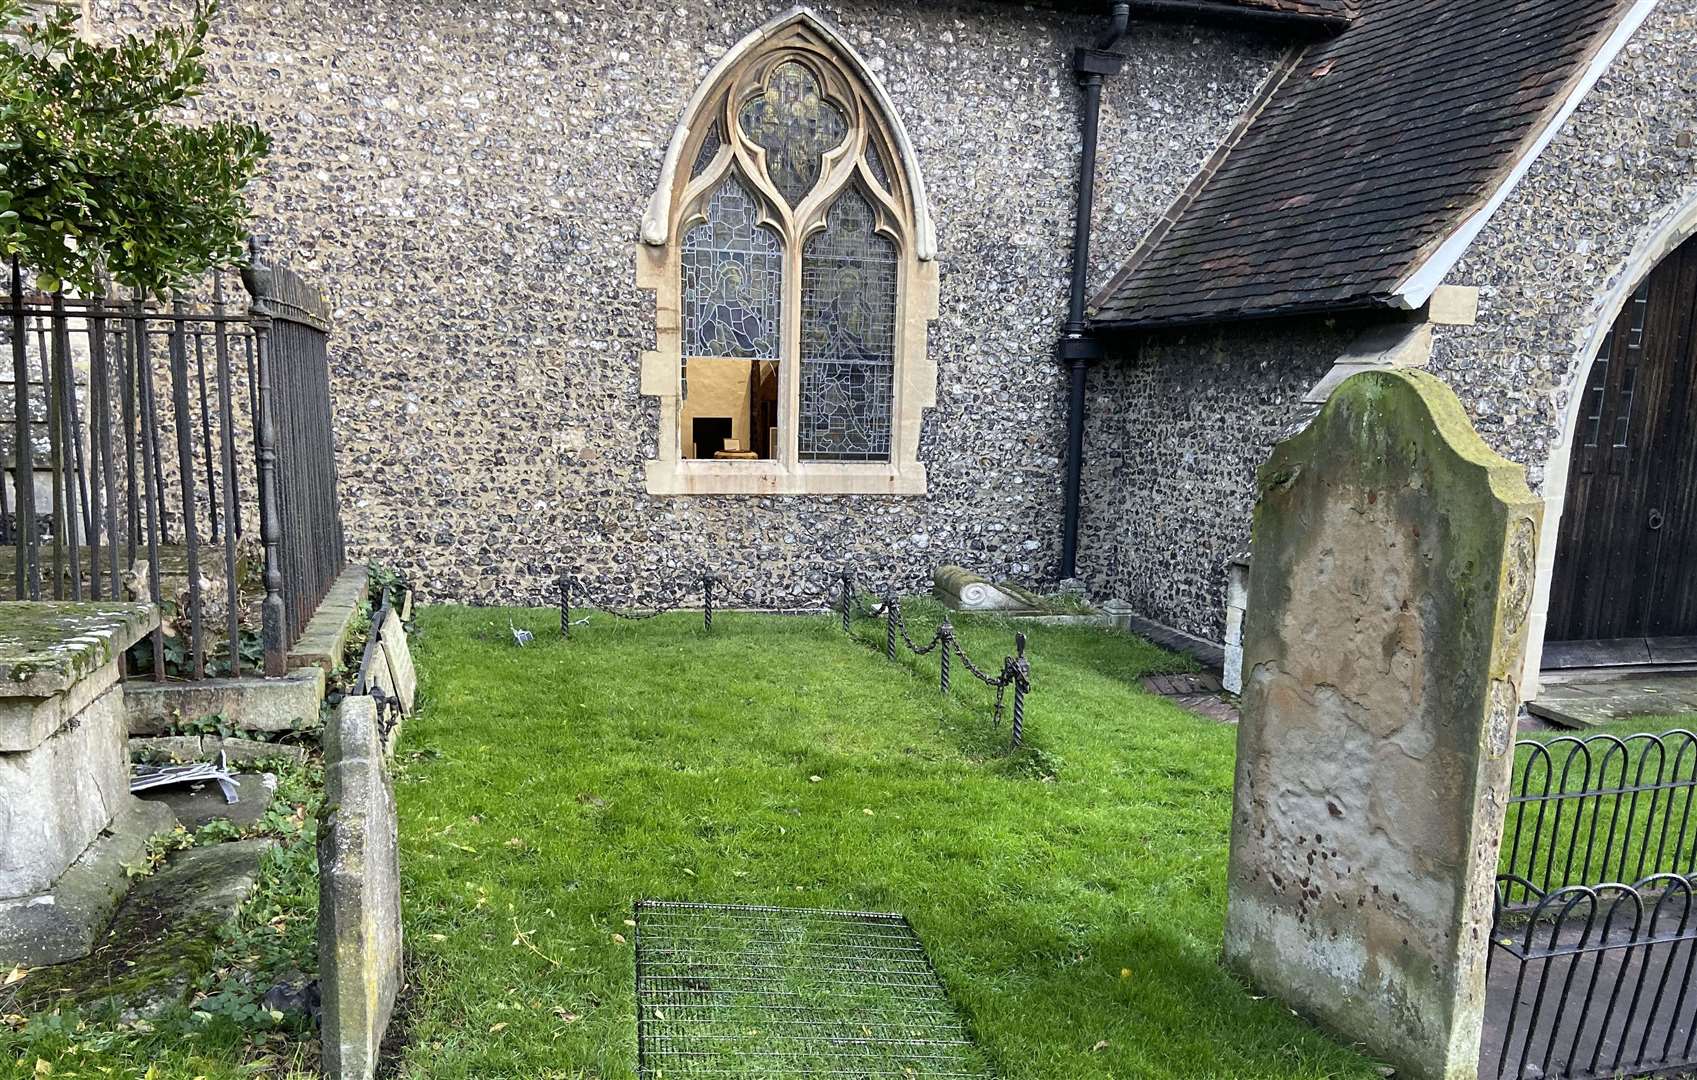 Thieves broke into St Margaret's after smashing a window. The pub's history is closely linked with the neighbouring church